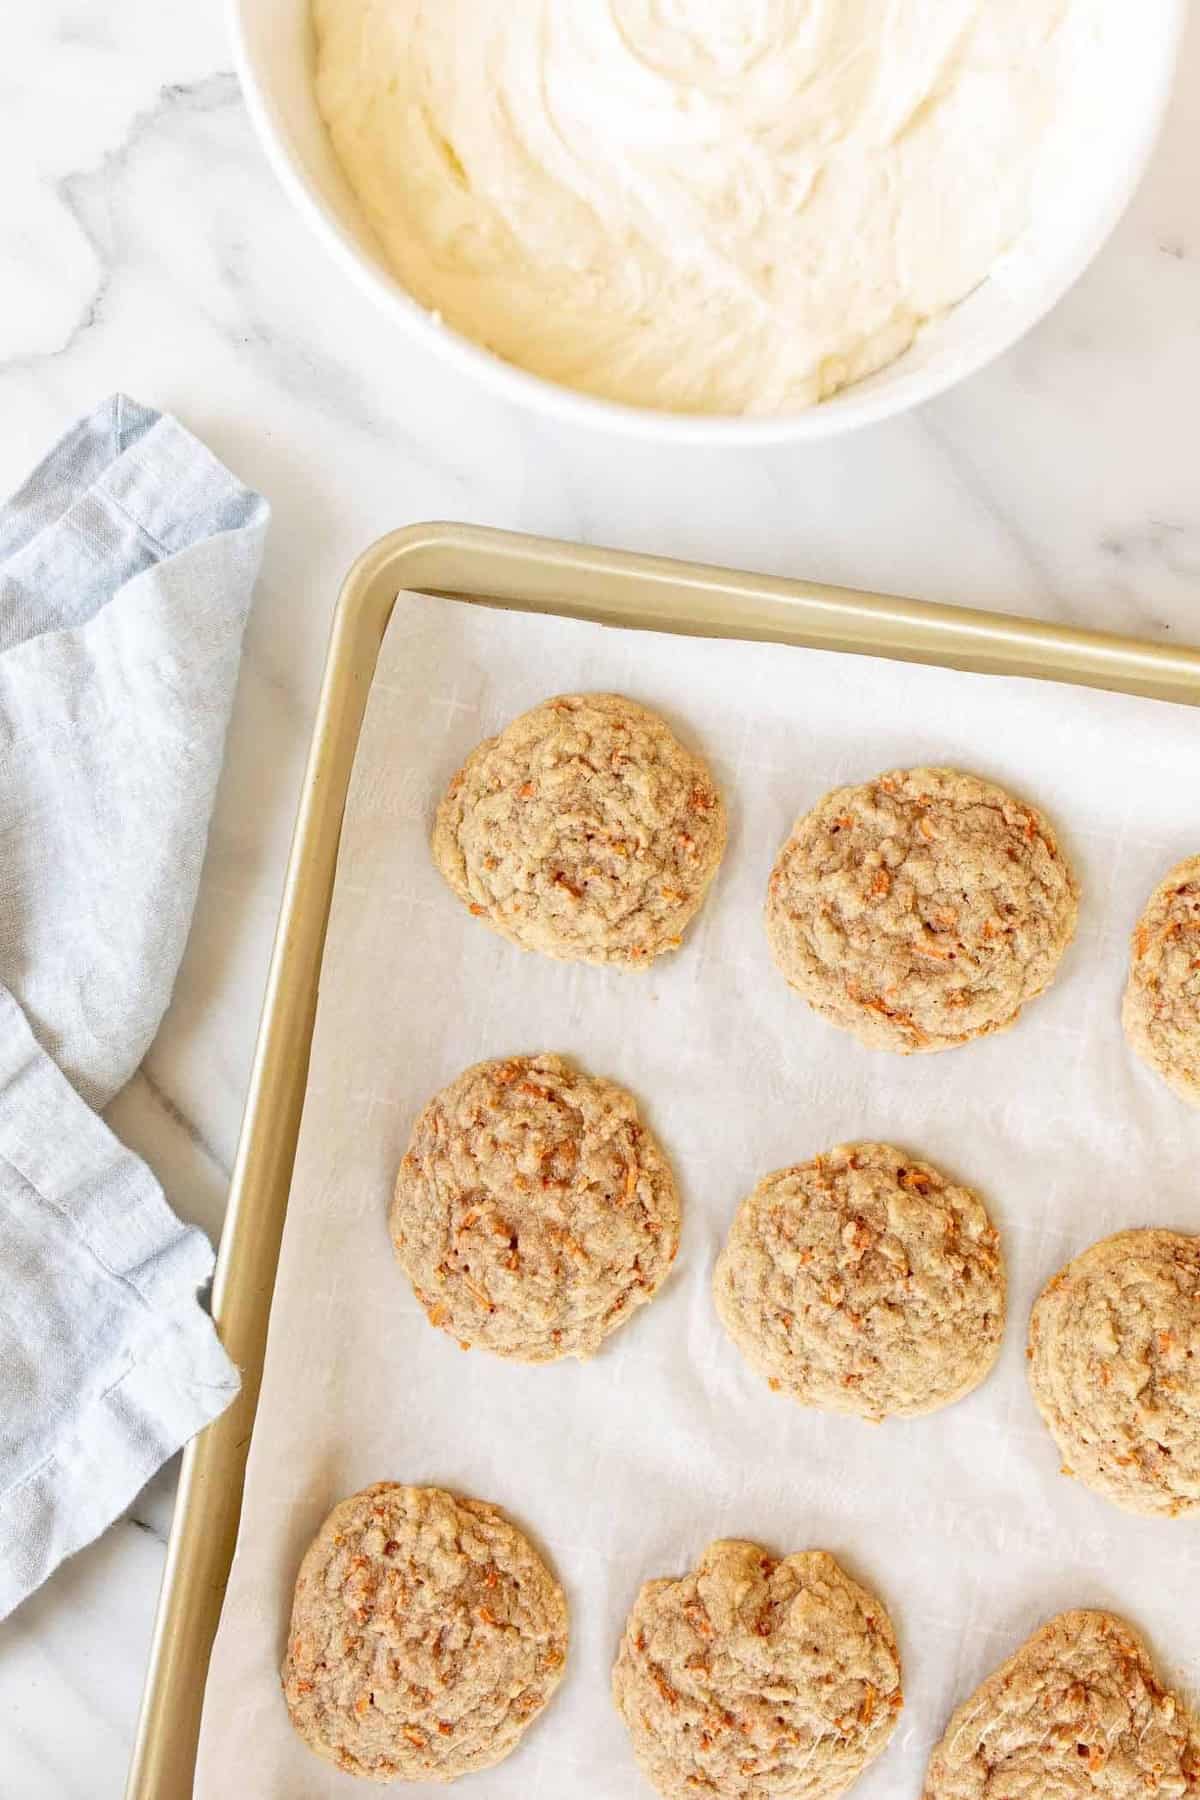 Gold baking sheet with carrot cookies.